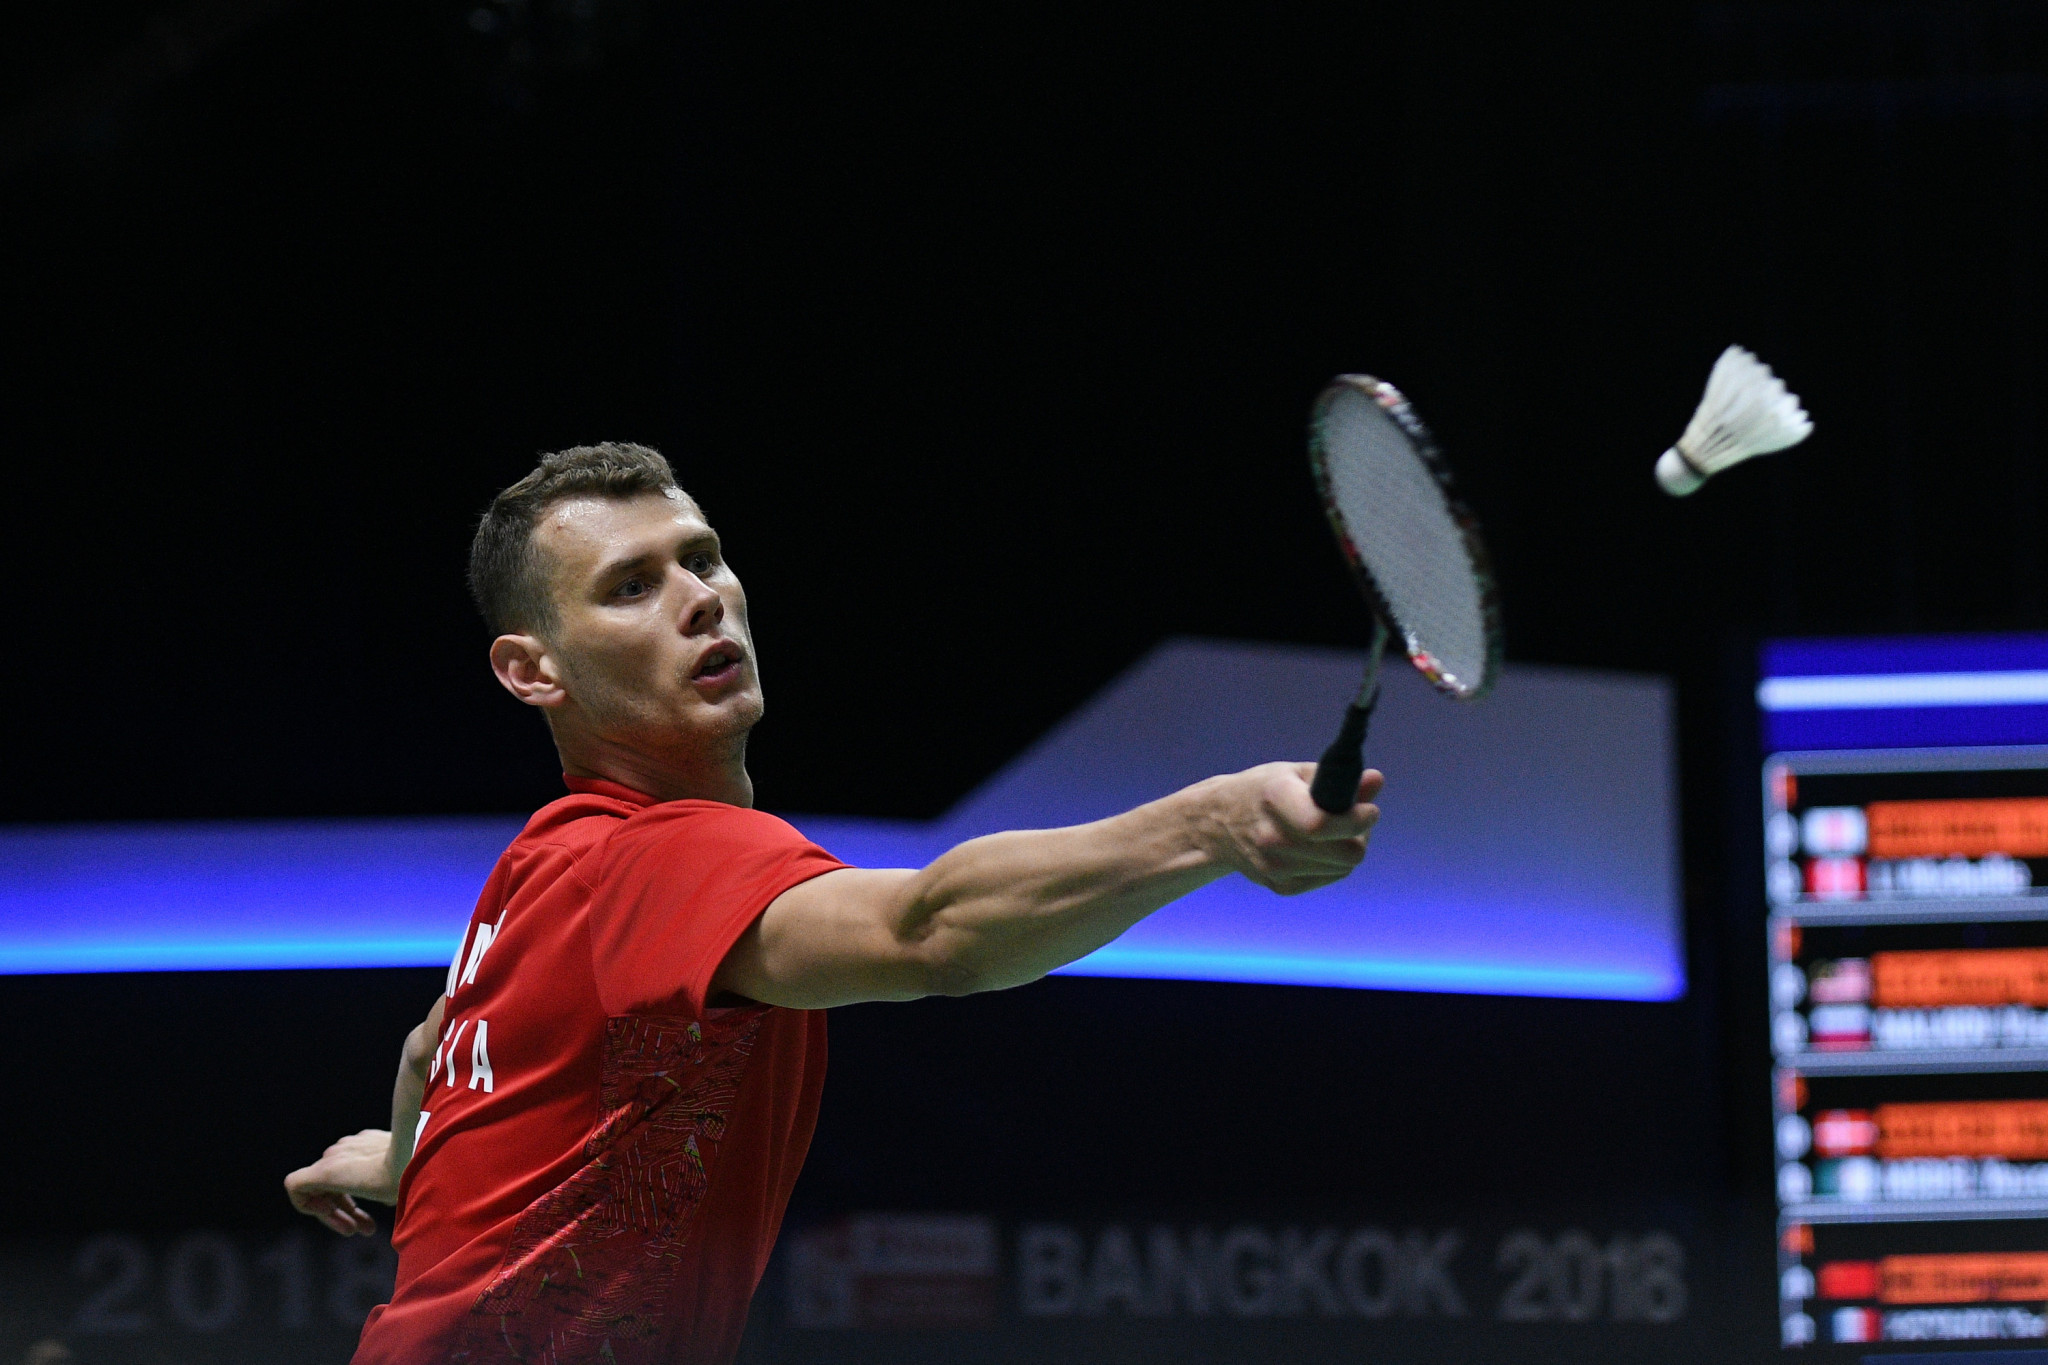 Vladimir Malkov helped Russia advance into the semi-finals with a 4-1 win over Ireland at the European Mixed Team Badminton Championships in Denmark ©Getty Images